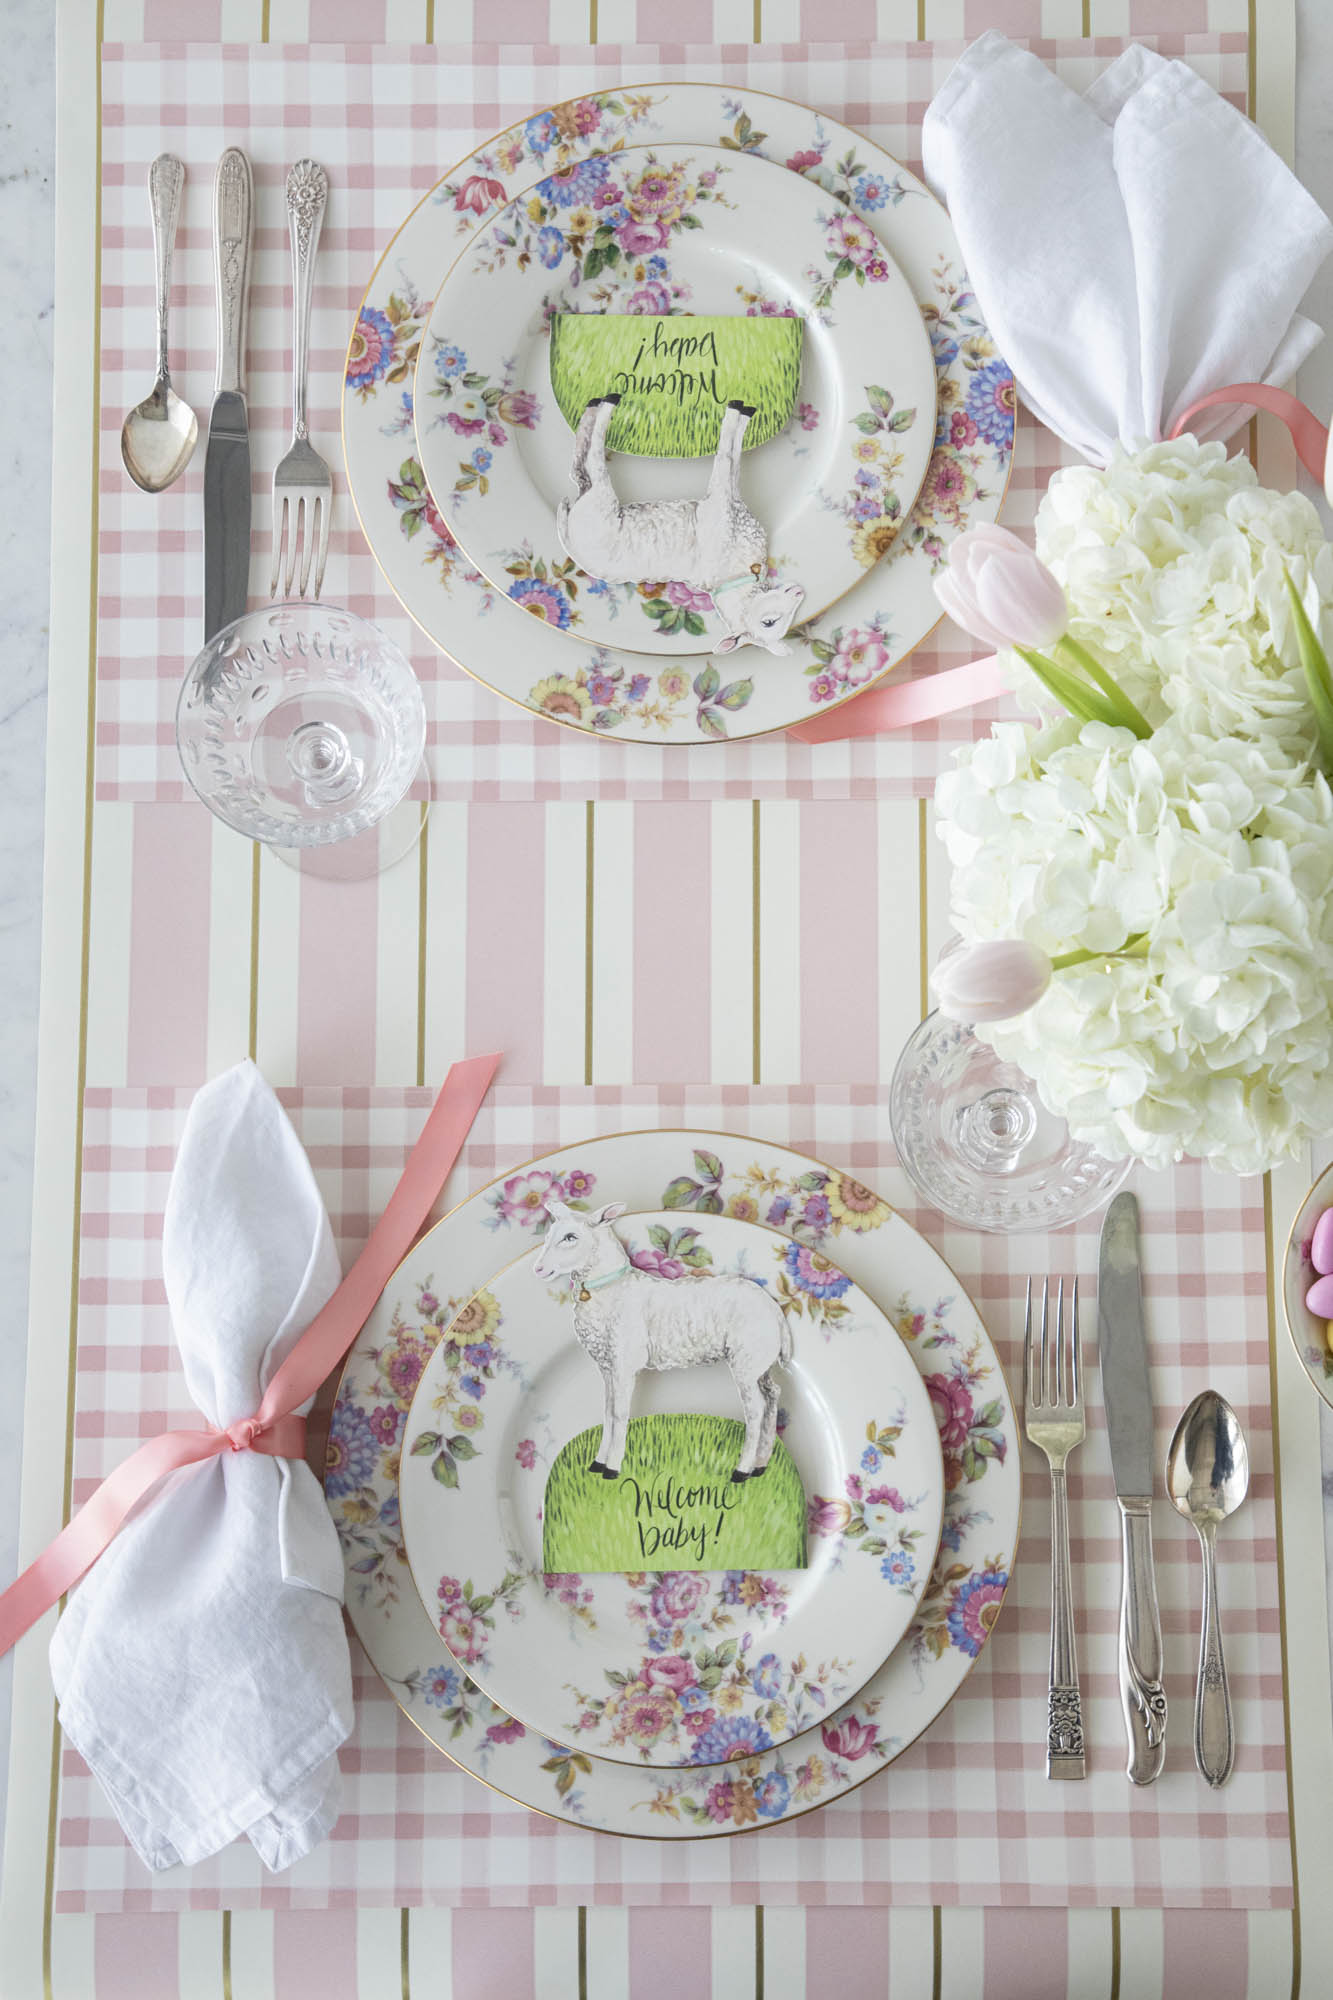 The Pink Painted Check Placemat under an elegant Easter-themed table setting, from above.